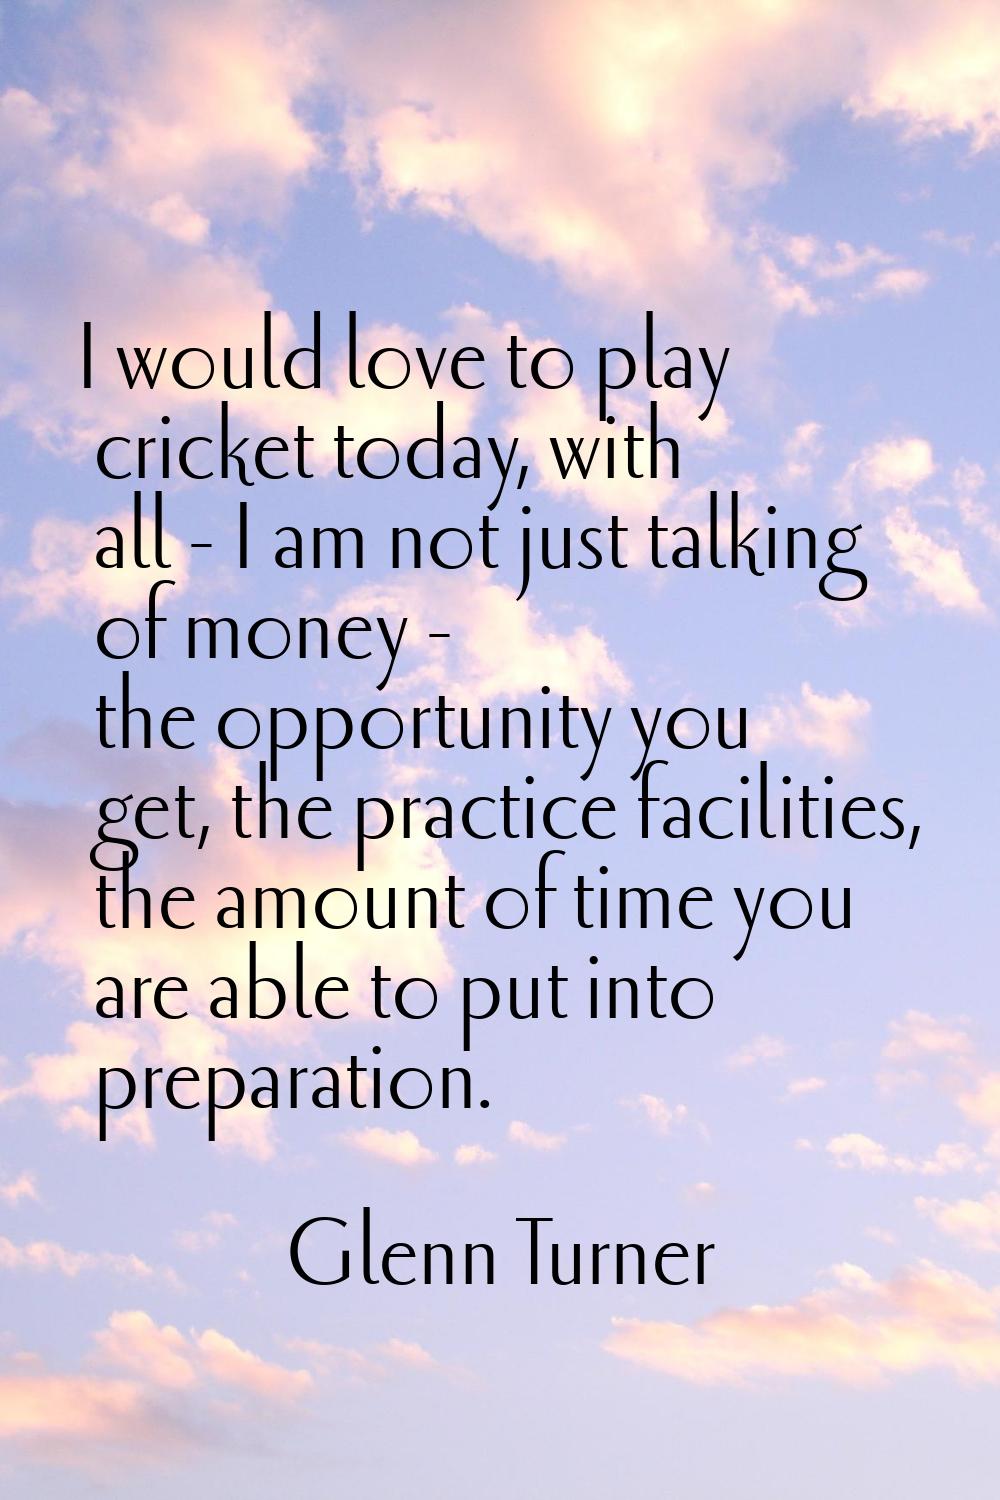 I would love to play cricket today, with all - I am not just talking of money - the opportunity you